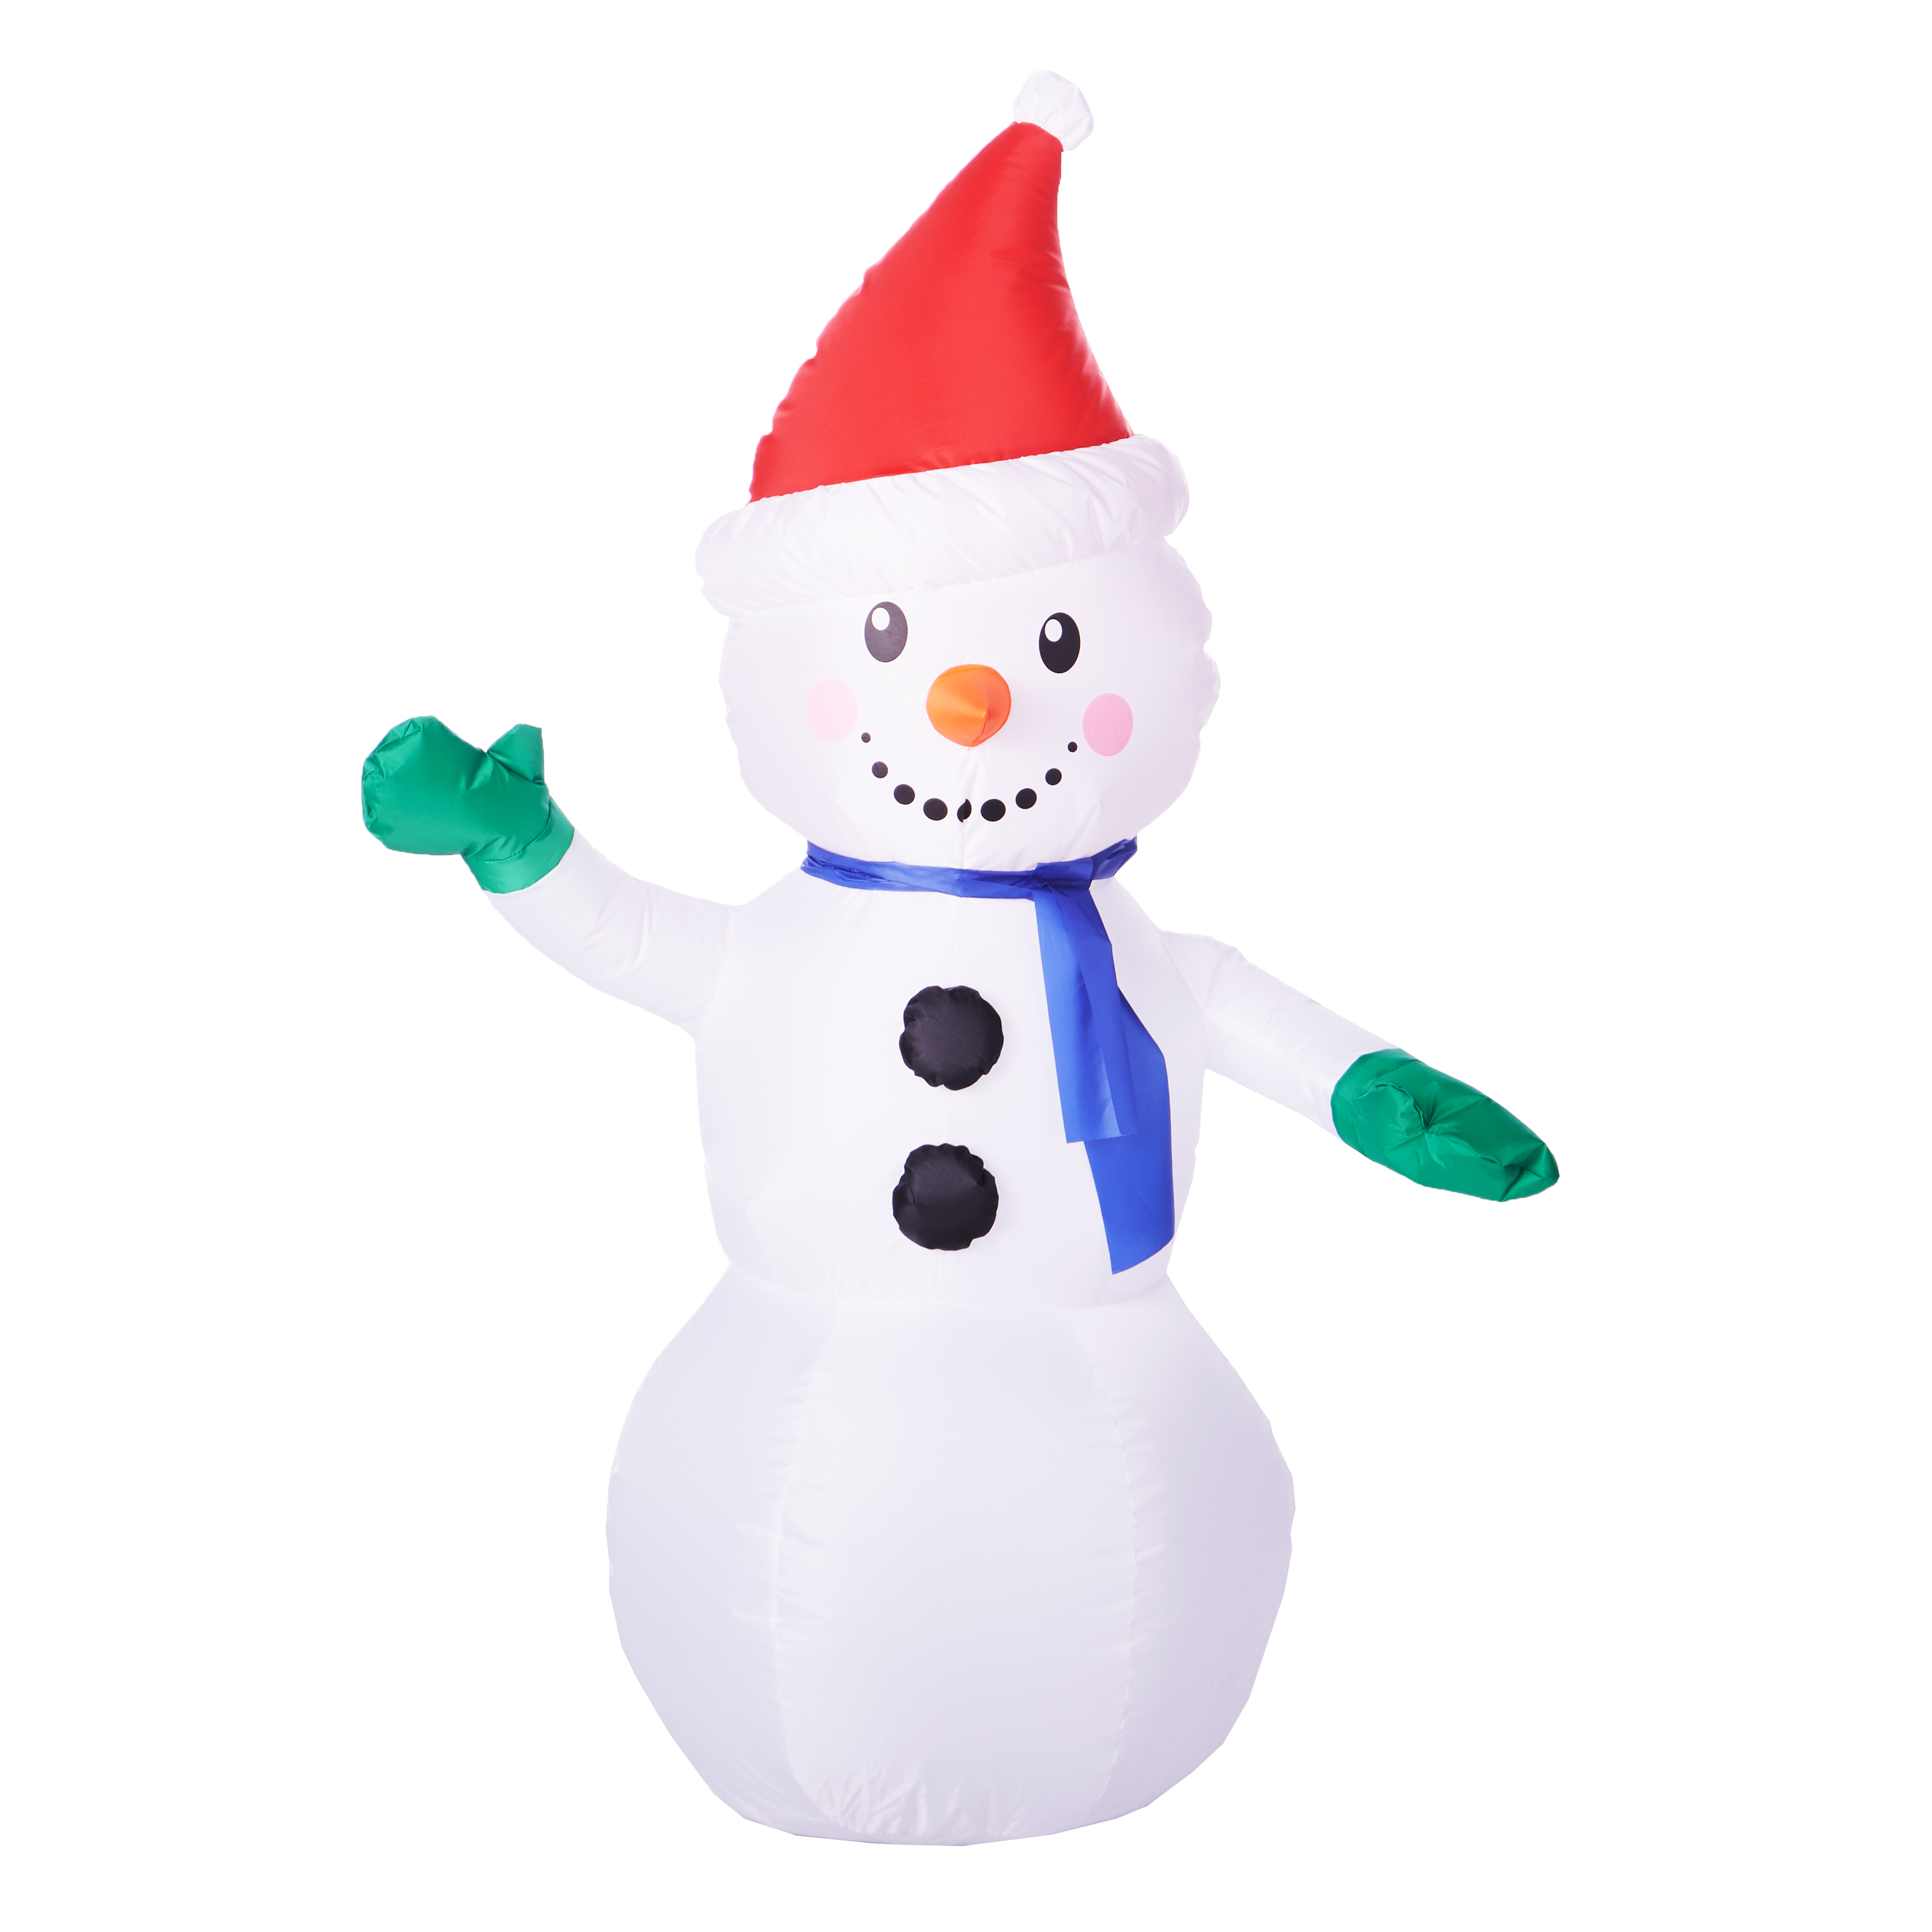 Airblown Inflatables 4 Ft. Waving Snowman - image 1 of 5